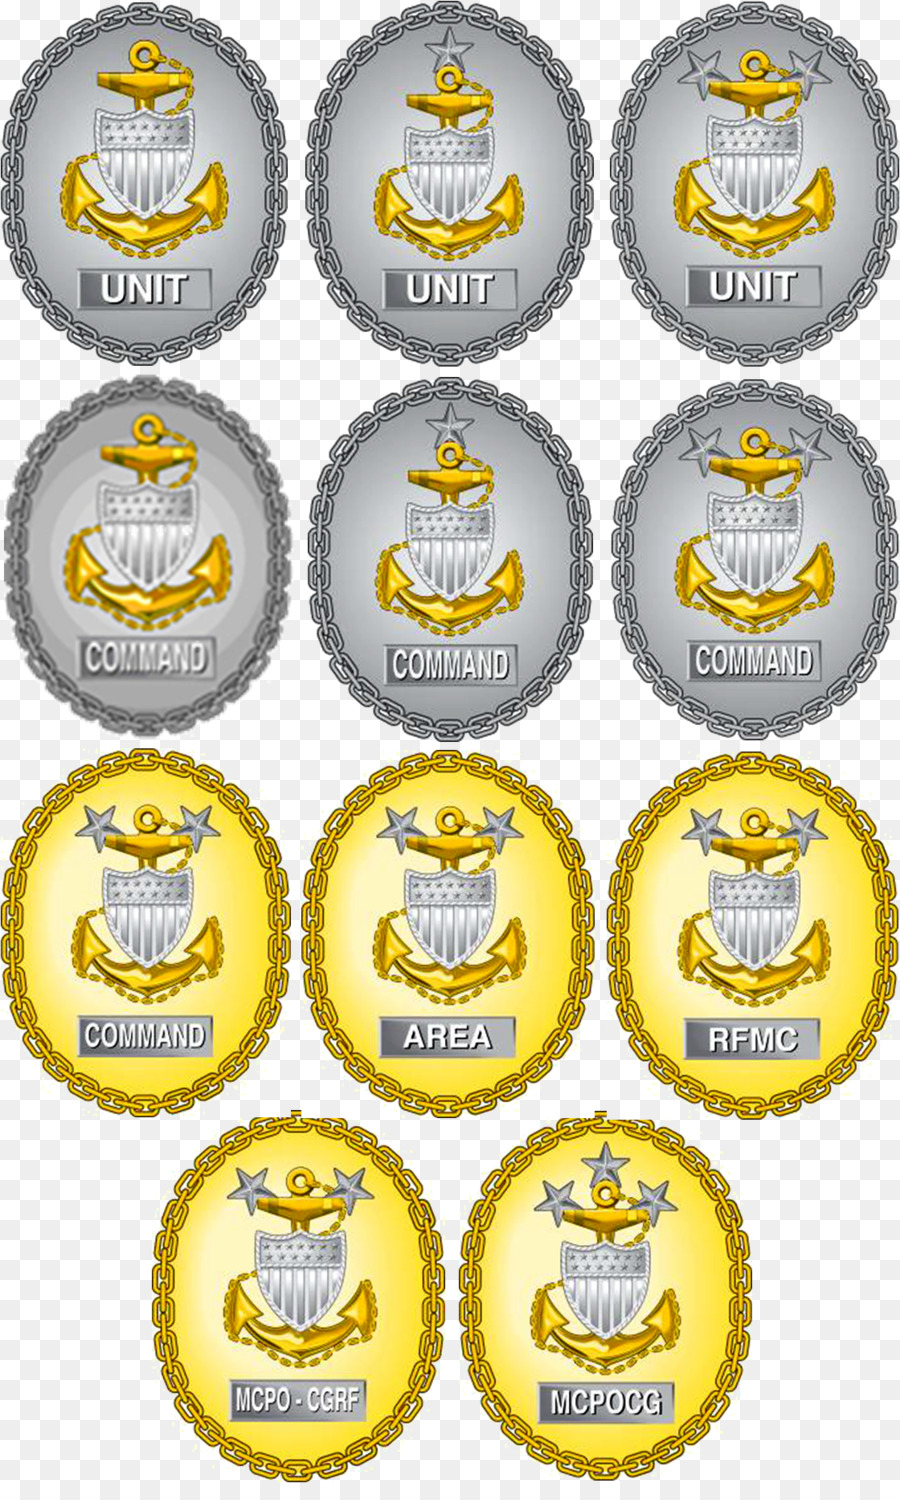 Command Senior Enlisted Leader Identifikation Abzeichen der United States Navy United States Coast Guard Chief petty officer, Senior enlisted advisor - Abzeichen